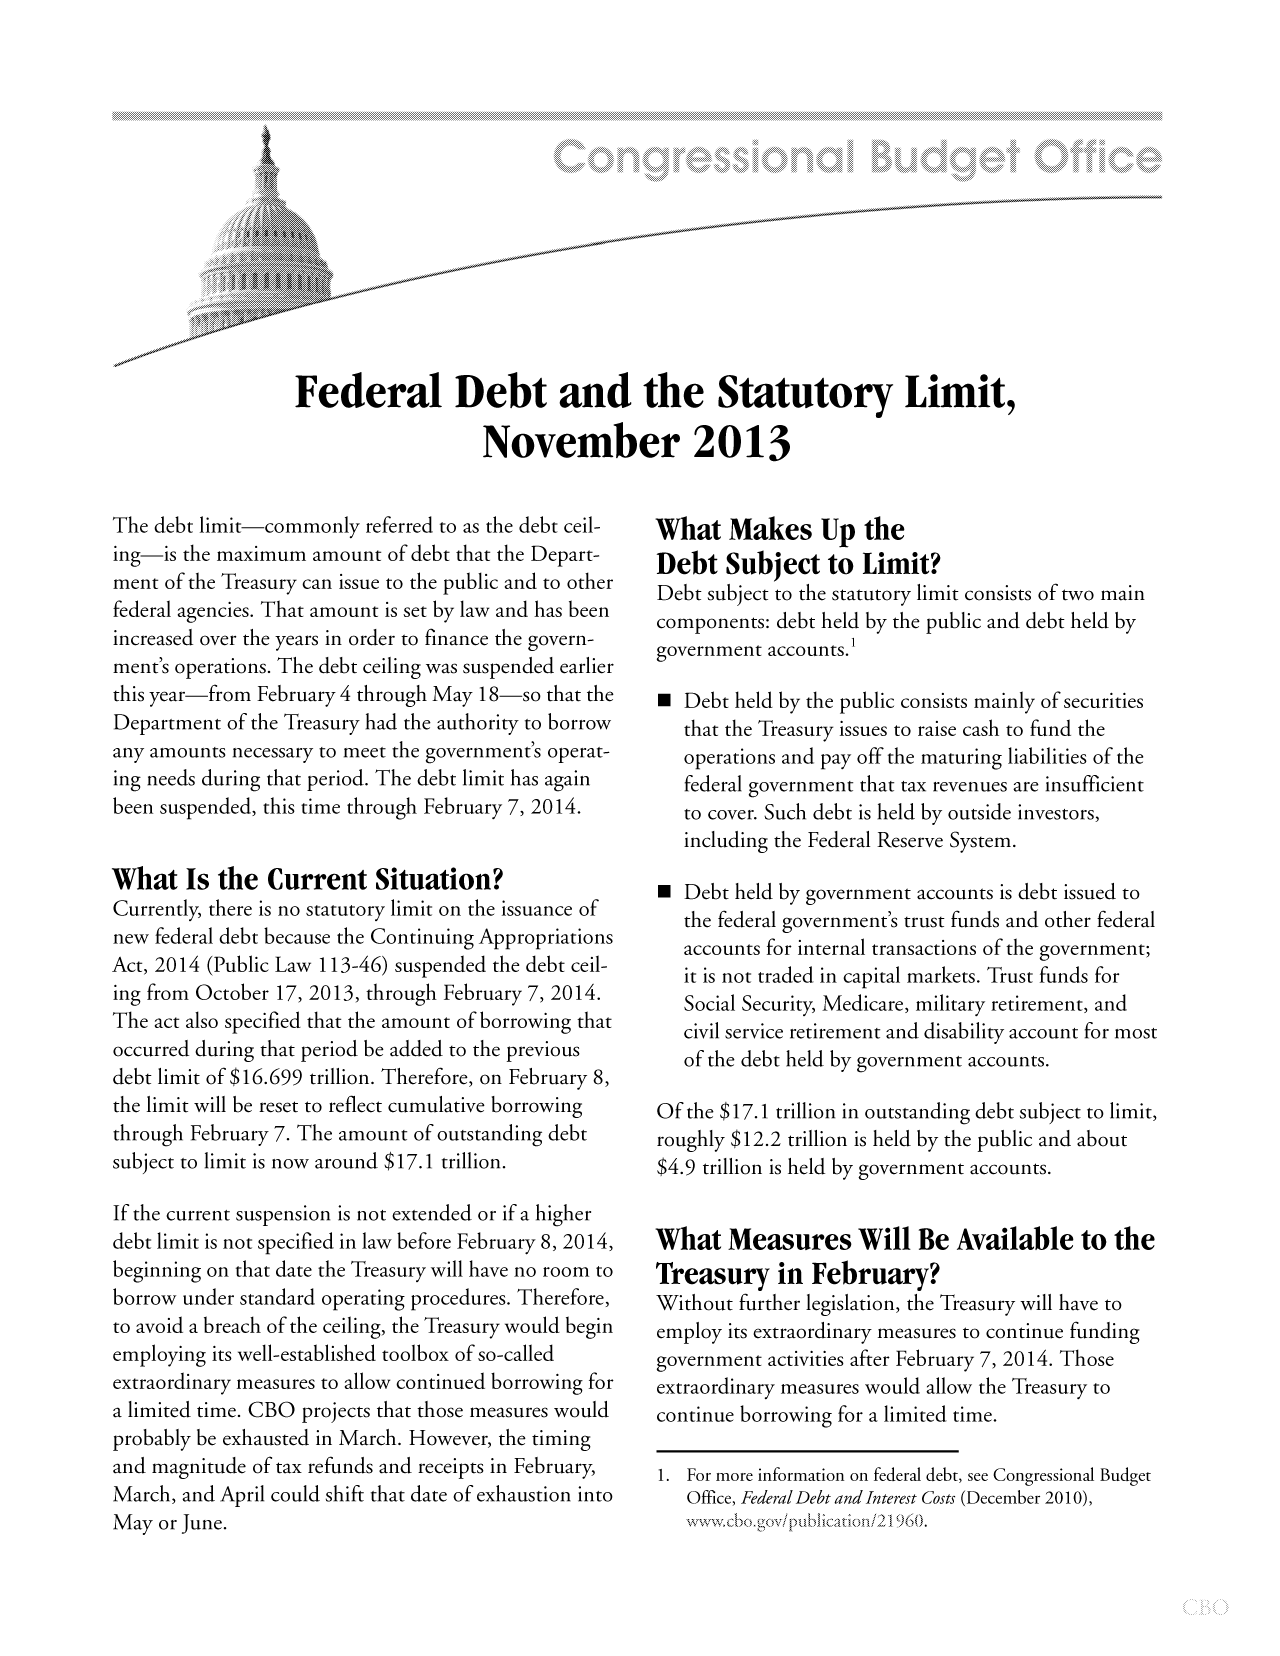 handle is hein.congrec/cbo11386 and id is 1 raw text is: Federal Debt and the Statutory Limit,
November 2013

The debt limit-commonly referred to as the debt ceil-
ing-is the maximum amount of debt that the Depart-
ment of the Treasury can issue to the public and to other
federal agencies. That amount is set by law and has been
increased over the years in order to finance the govern-
ment's operations. The debt ceiling was suspended earlier
this year-from February 4 through May 18-so that the
Department of the Treasury had the authority to borrow
any amounts necessary to meet the government's operat-
ing needs during that period. The debt limit has again
been suspended, this time through February 7, 2014.
What Is the Current Situation?
Currently, there is no statutory limit on the issuance of
new federal debt because the Continuing Appropriations
Act, 2014 (Public Law 113-46) suspended the debt ceil-
ing from October 17, 2013, through February 7, 2014.
The act also specified that the amount of borrowing that
occurred during that period be added to the previous
debt limit of $16.699 trillion. Therefore, on February 8,
the limit will be reset to reflect cumulative borrowing
through February 7. The amount of outstanding debt
subject to limit is now around $17.1 trillion.
If the current suspension is not extended or if a higher
debt limit is not specified in law before February 8, 2014,
beginning on that date the Treasury will have no room to
borrow under standard operating procedures. Therefore,
to avoid a breach of the ceiling, the Treasury would begin
employing its well-established toolbox of so-called
extraordinary measures to allow continued borrowing for
a limited time. CBO projects that those measures would
probably be exhausted in March. However, the timing
and magnitude of tax refunds and receipts in February,
March, and April could shift that date of exhaustion into
May or June.

What Makes Up the
Debt Subject to Limit?
Debt subject to the statutory limit consists of two main
components: debt held by the public and debt held by
government accounts.'
m Debt held by the public consists mainly of securities
that the Treasury issues to raise cash to fund the
operations and pay off the maturing liabilities of the
federal government that tax revenues are insufficient
to cover. Such debt is held by outside investors,
including the Federal Reserve System.
m Debt held by government accounts is debt issued to
the federal government's trust funds and other federal
accounts for internal transactions of the government;
it is not traded in capital markets. Trust funds for
Social Security, Medicare, military retirement, and
civil service retirement and disability account for most
of the debt held by government accounts.
Of the $17.1 trillion in outstanding debt subject to limit,
roughly $12.2 trillion is held by the public and about
$4.9 trillion is held by government accounts.
What Measures Will Be Available to the
Treasury in February?
Without further legislation, the Treasury will have to
employ its extraordinary measures to continue funding
government activities after February 7, 2014. Those
extraordinary measures would allow the Treasury to
continue borrowing for a limited time.
1. For more information on federal debt, see Congressional Budget
Office, Federal Debt and Interest Costs (December 2010),


